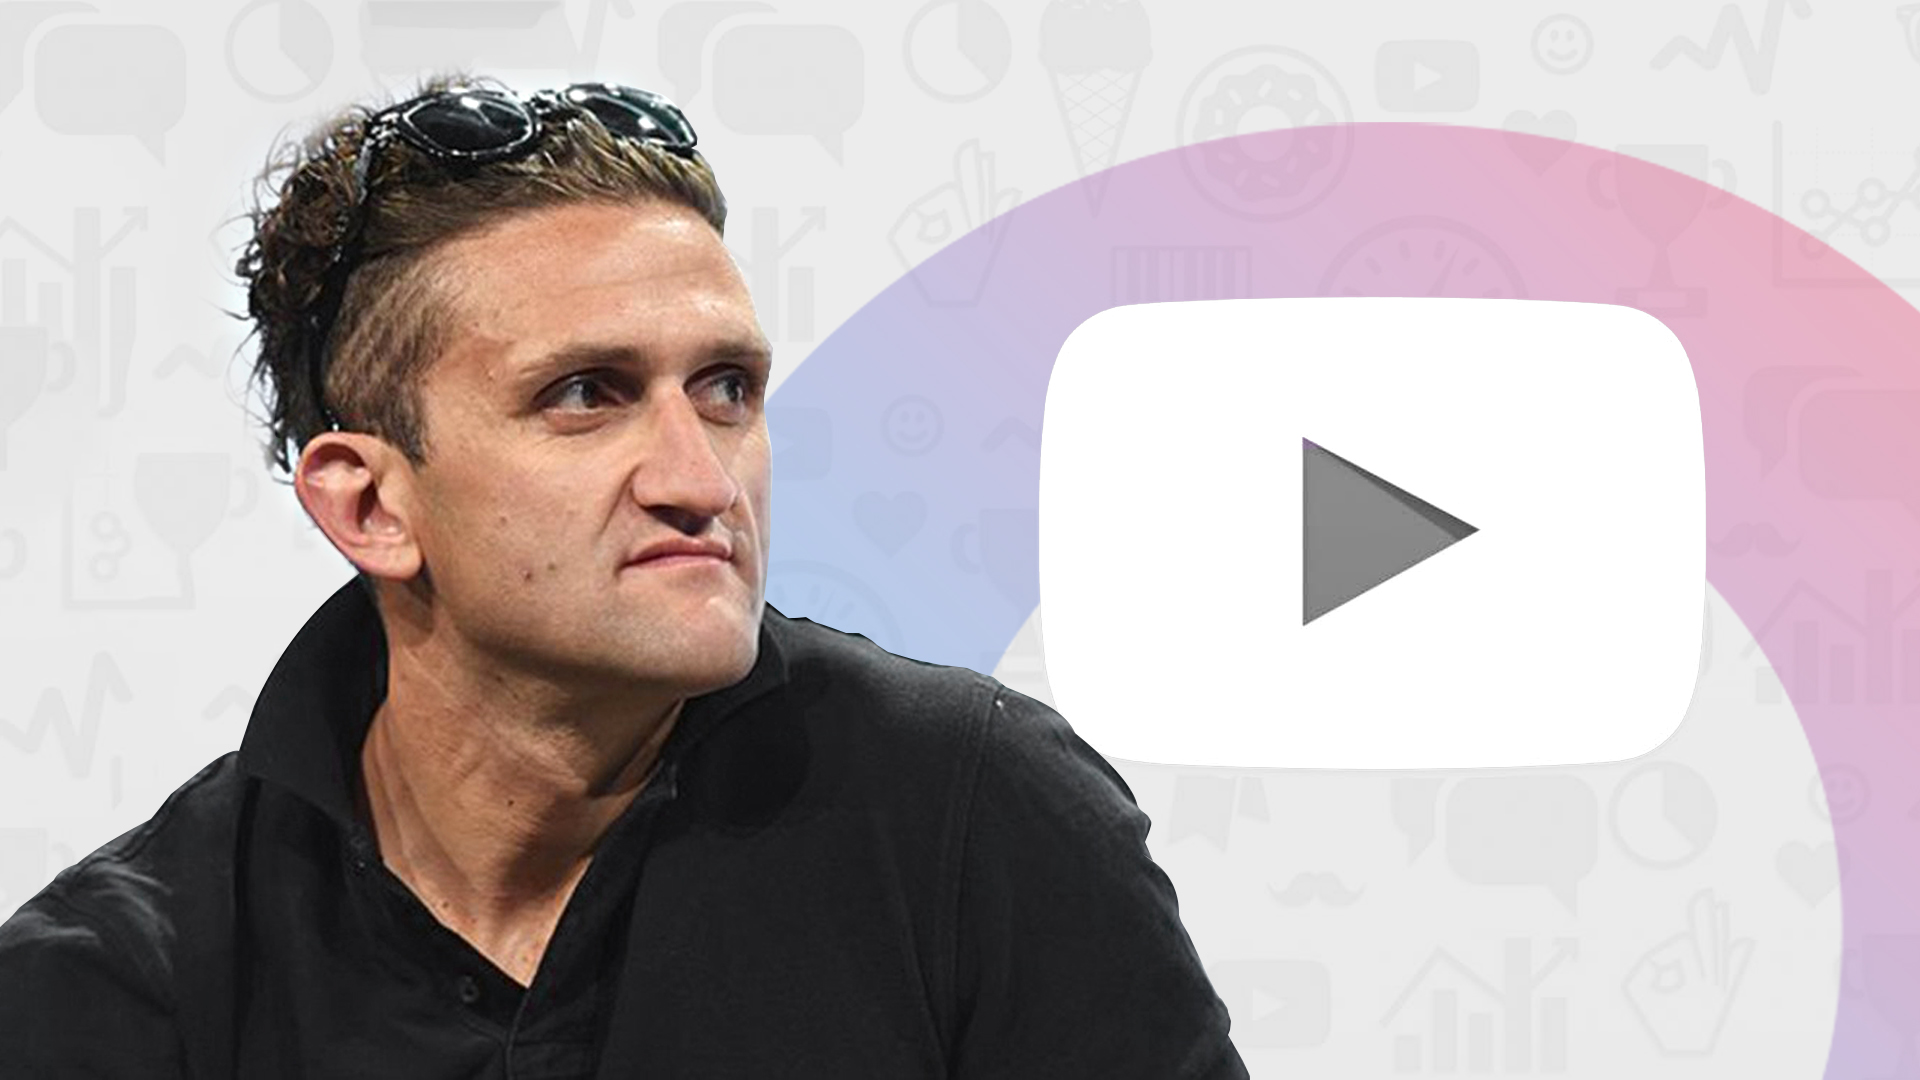 Casey Neistat Switch Social Media Platform from YouTube to HBO as a Creator Dubai ICON